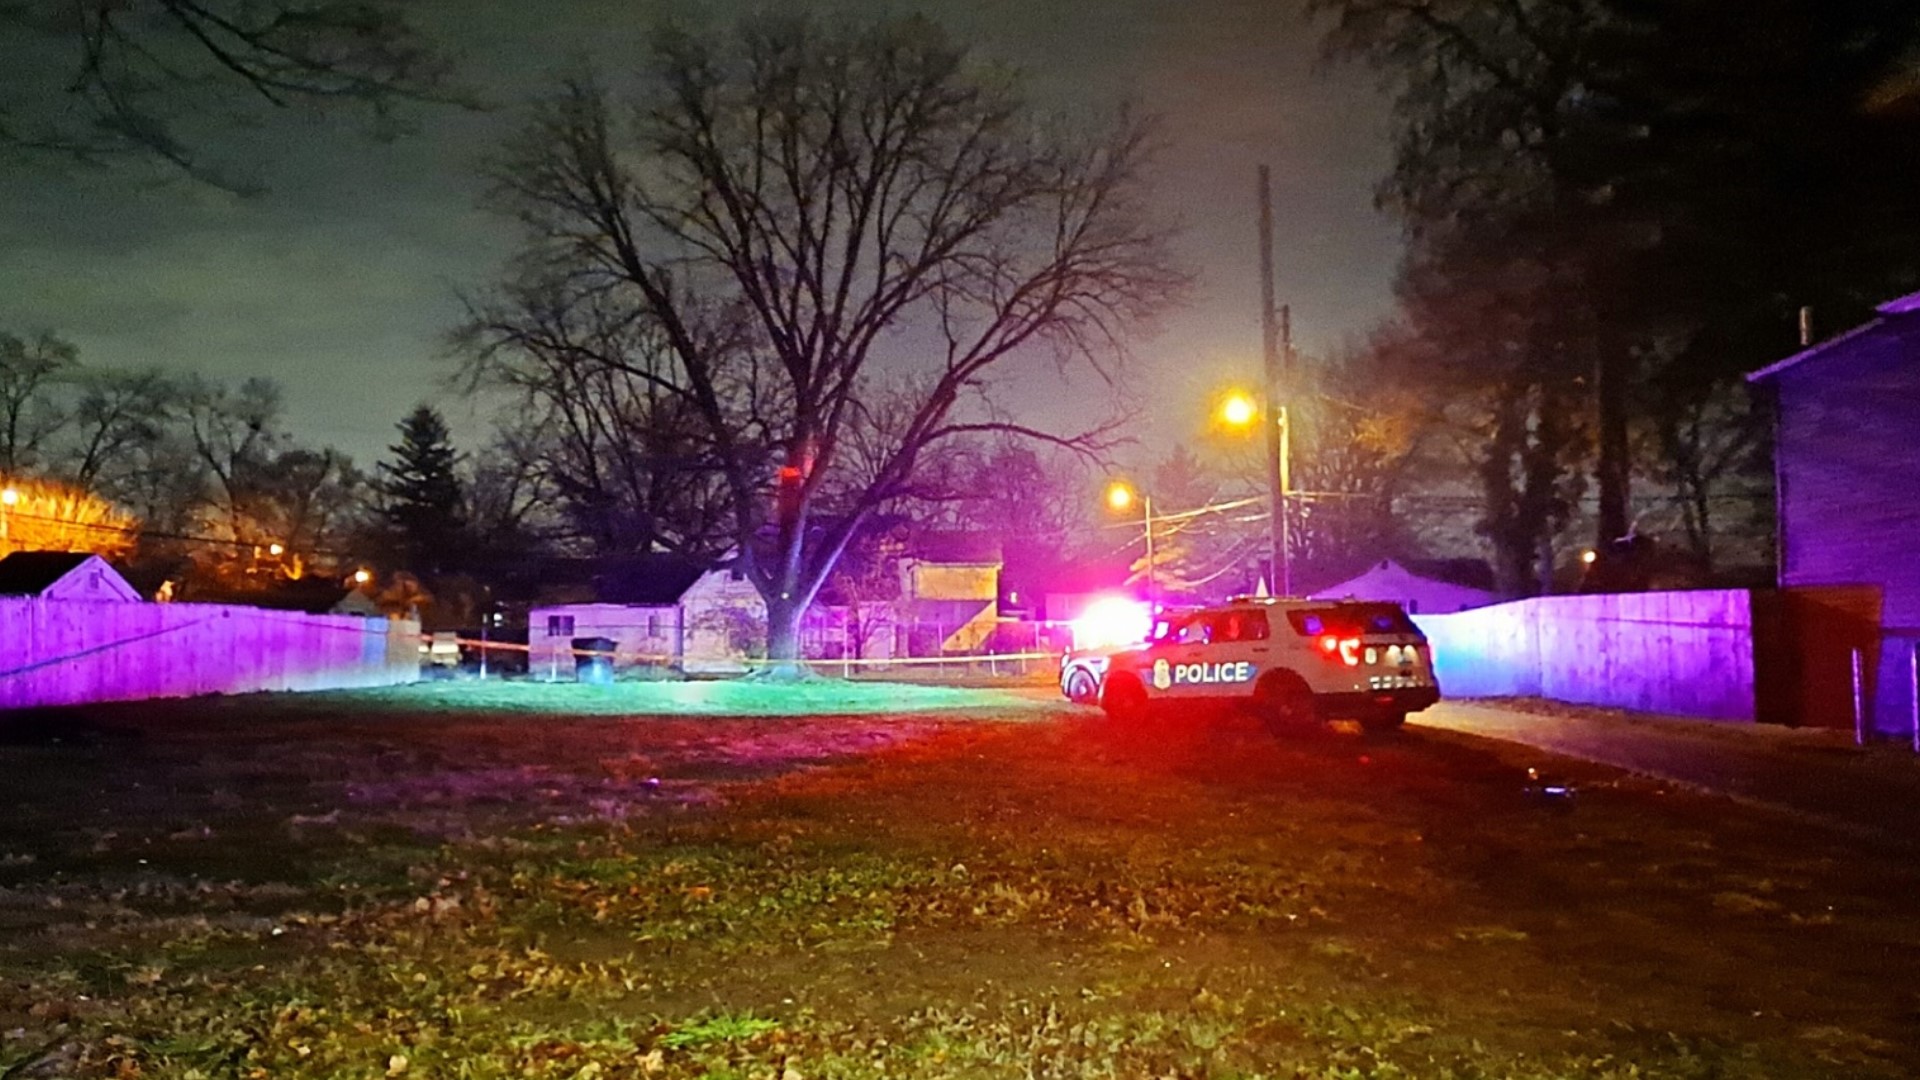 The shooting happened just after 2:20 a.m. at South Highland Avenue and Sheridan Street, according to Columbus police.